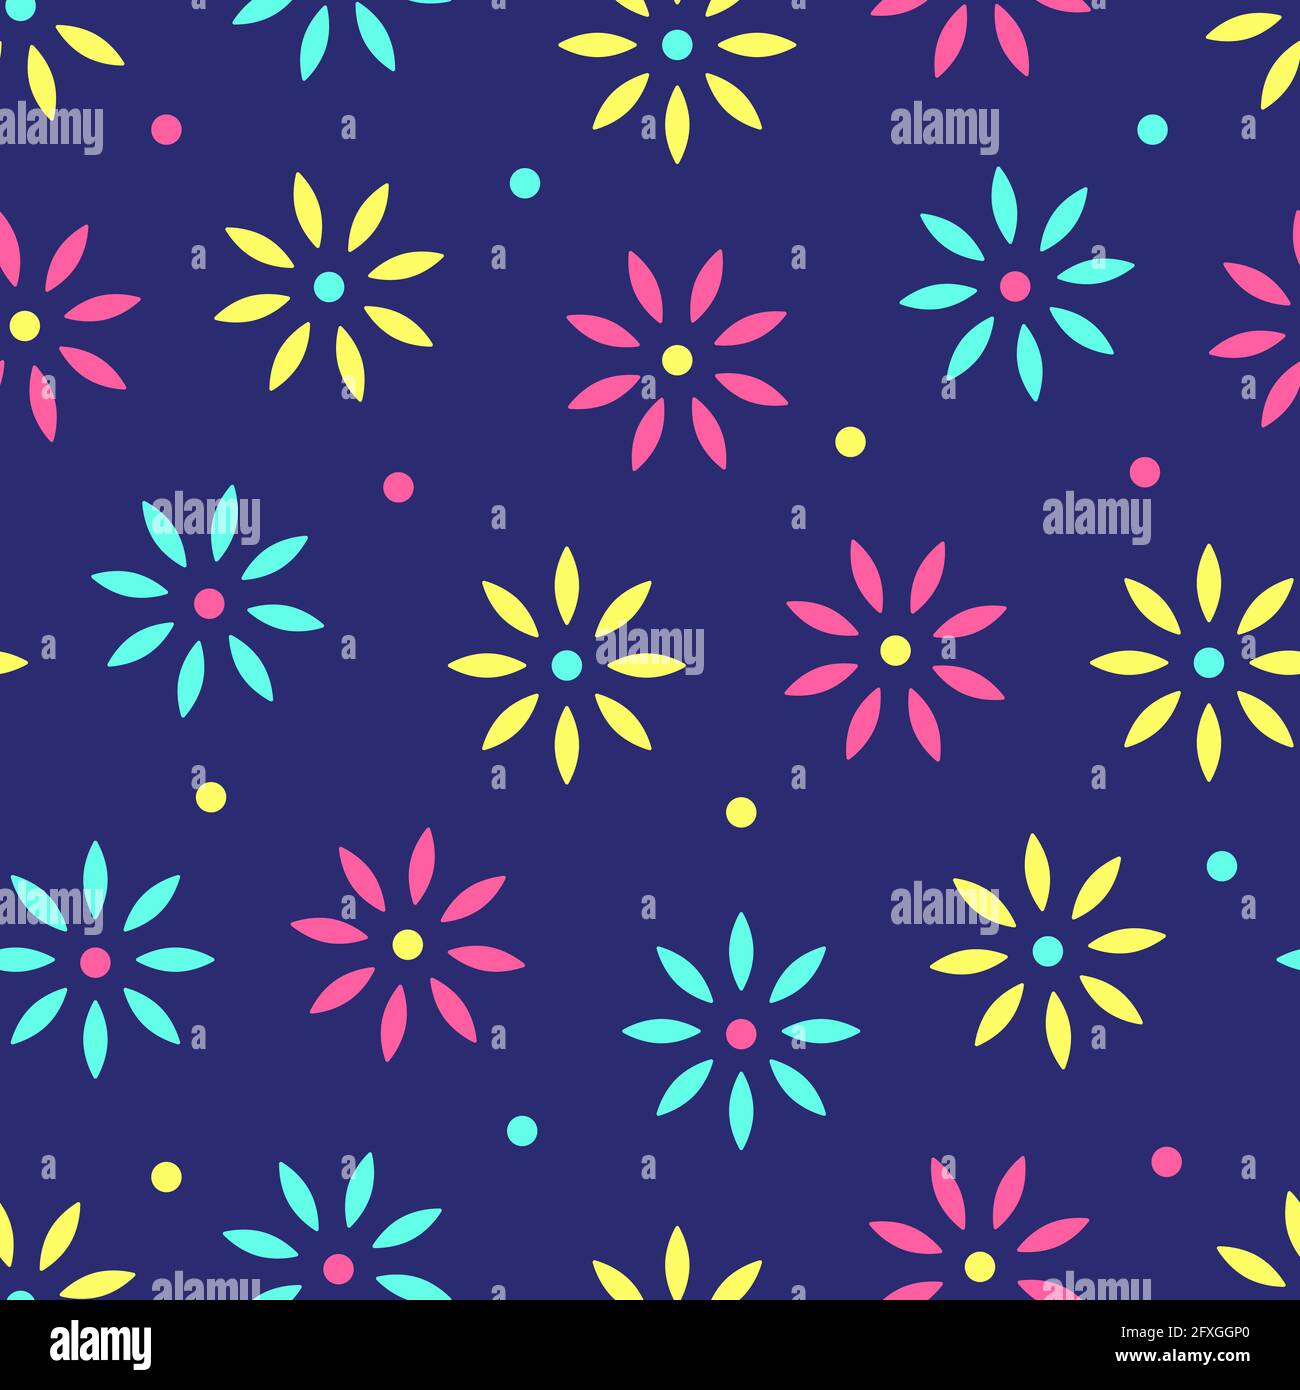 Seamless pattern of geometric abstract flowers of different colors on a dark blue background, daisies, asters Vector illustration. Stock Photo